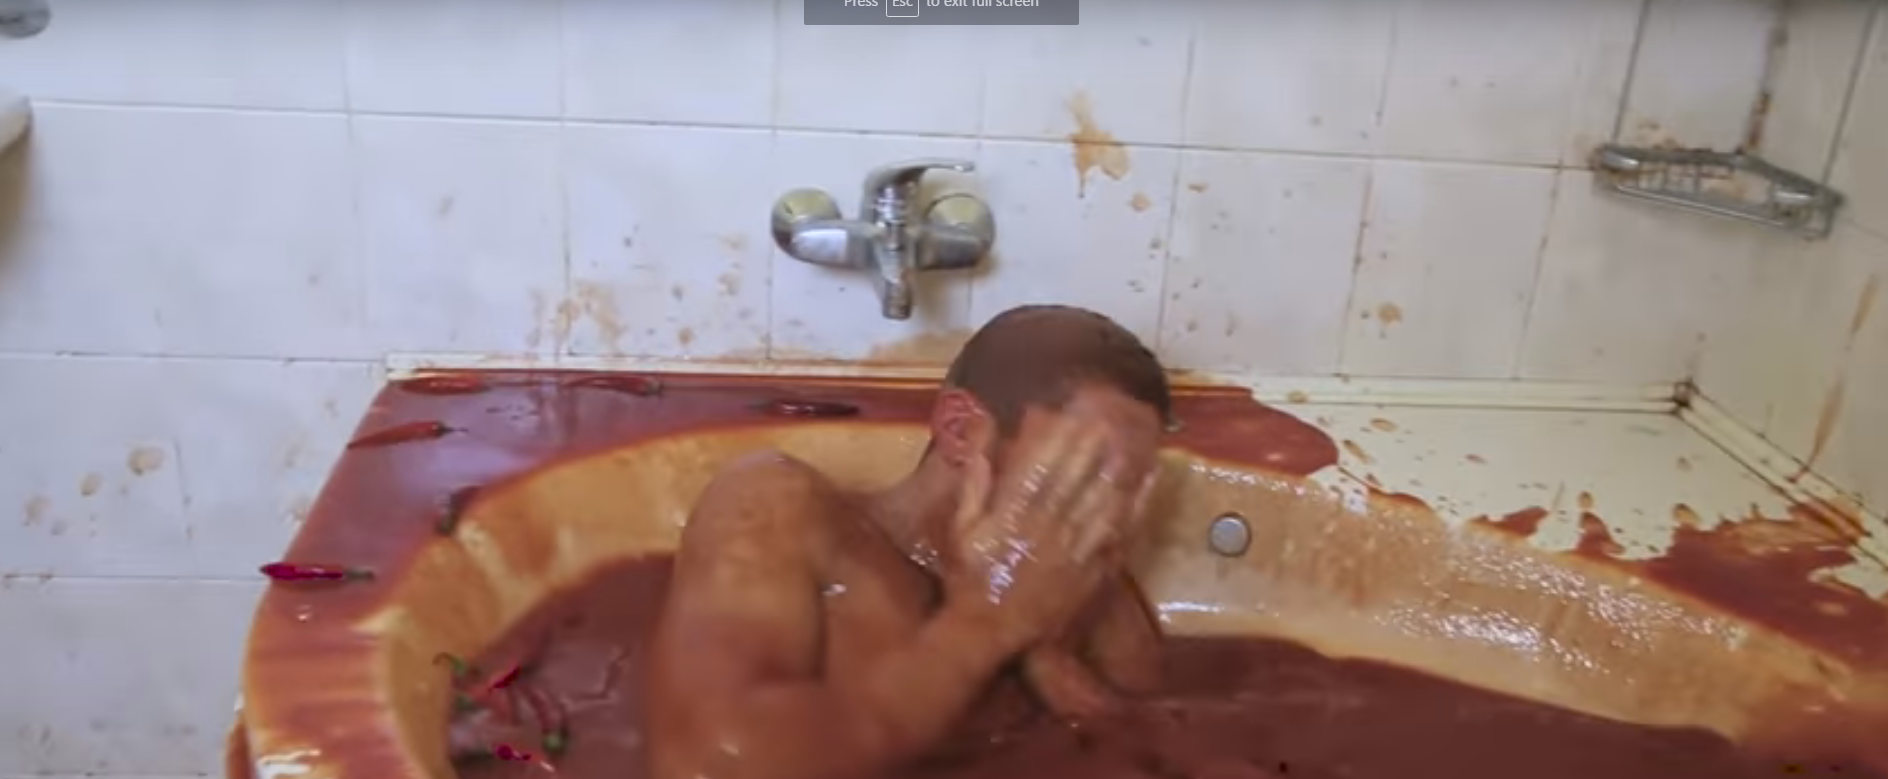 Watch This Stupid Idiot Jump in a Bathtub Full of Hot Sauce